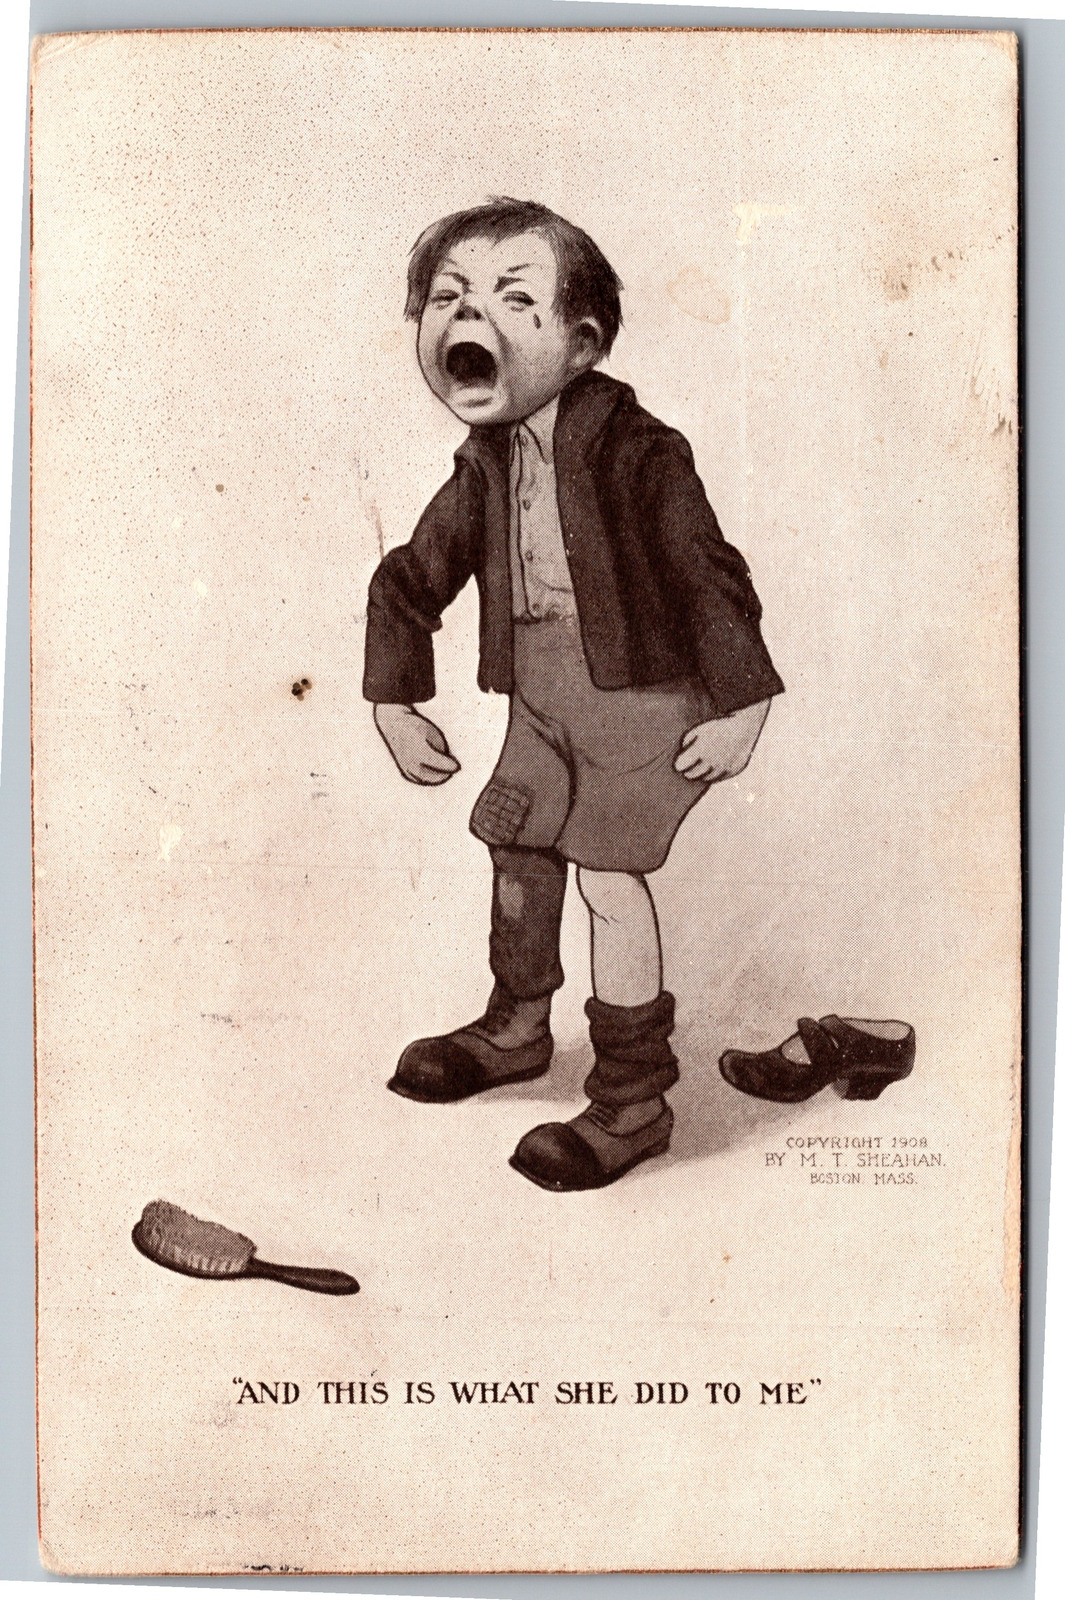 Postcard 1908 Sheahan crying boy spanked And this is what she did to me